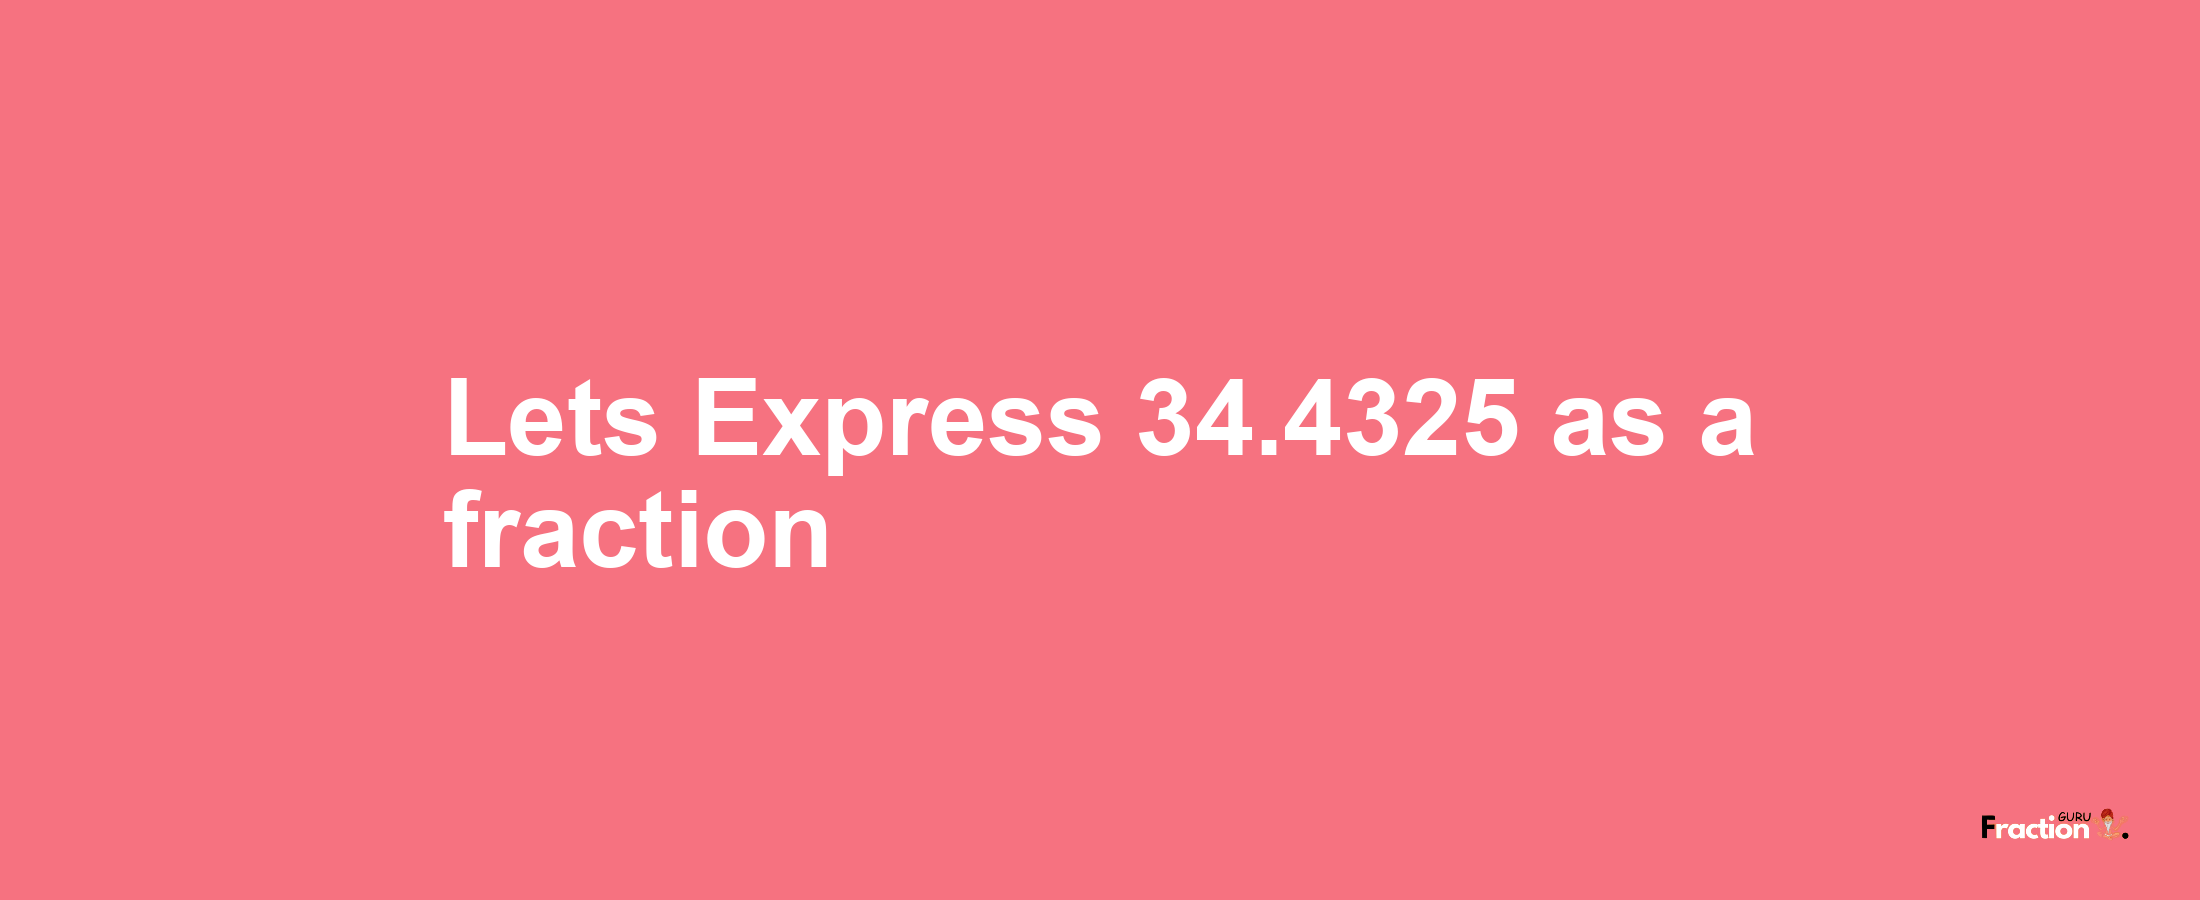 Lets Express 34.4325 as afraction